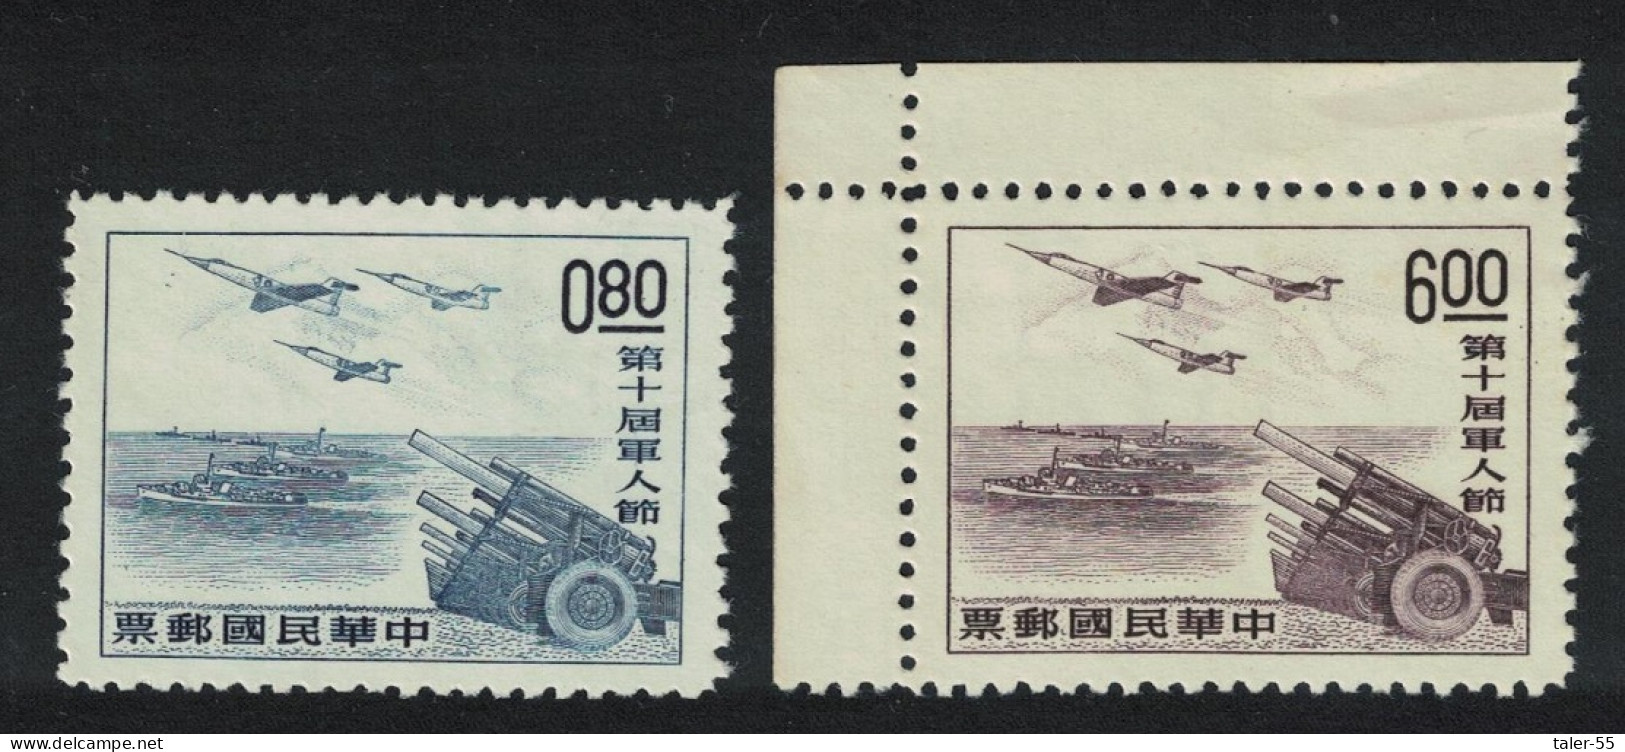 Taiwan Armed Forces Day 2v 1964 MNH SG#518-519 MI#540-541 - Unused Stamps